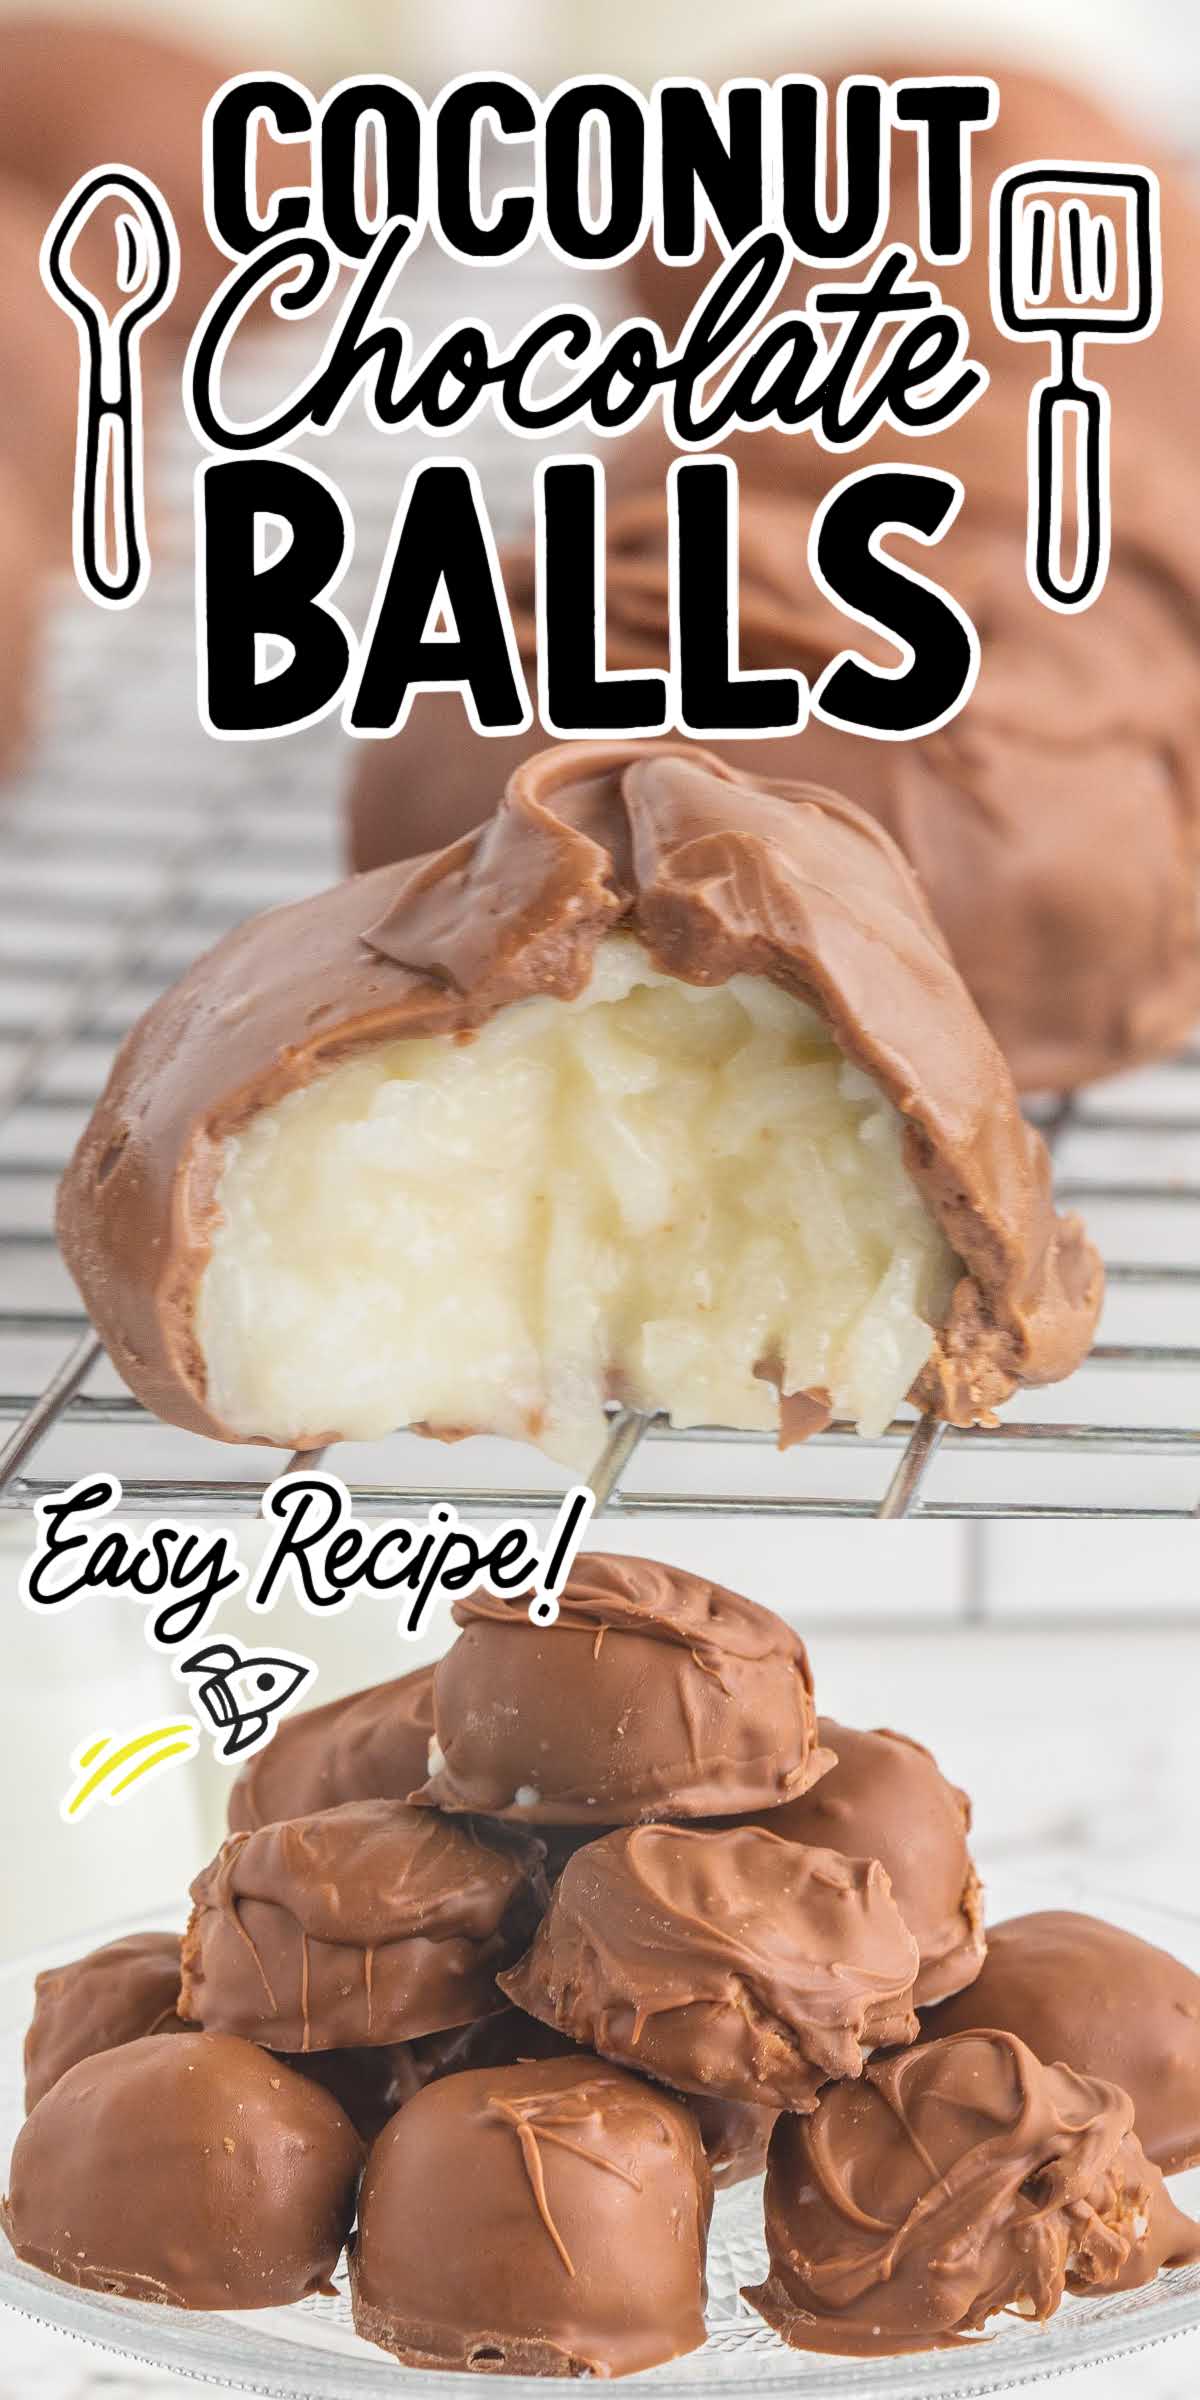 Coconut Chocolate Balls - Spaceships and Laser Beams